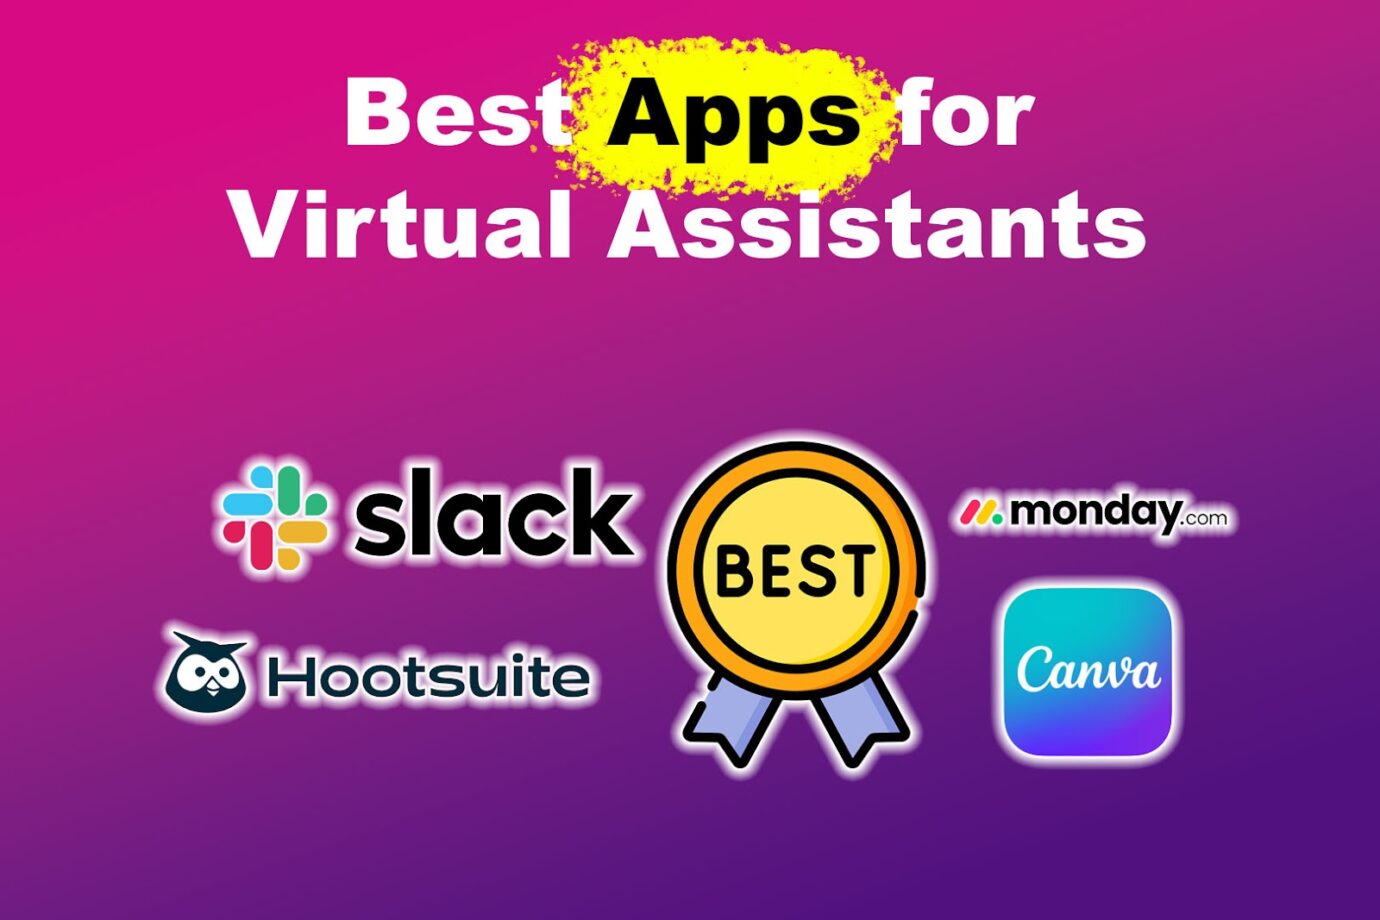 Best Apps for Virtual Assistants